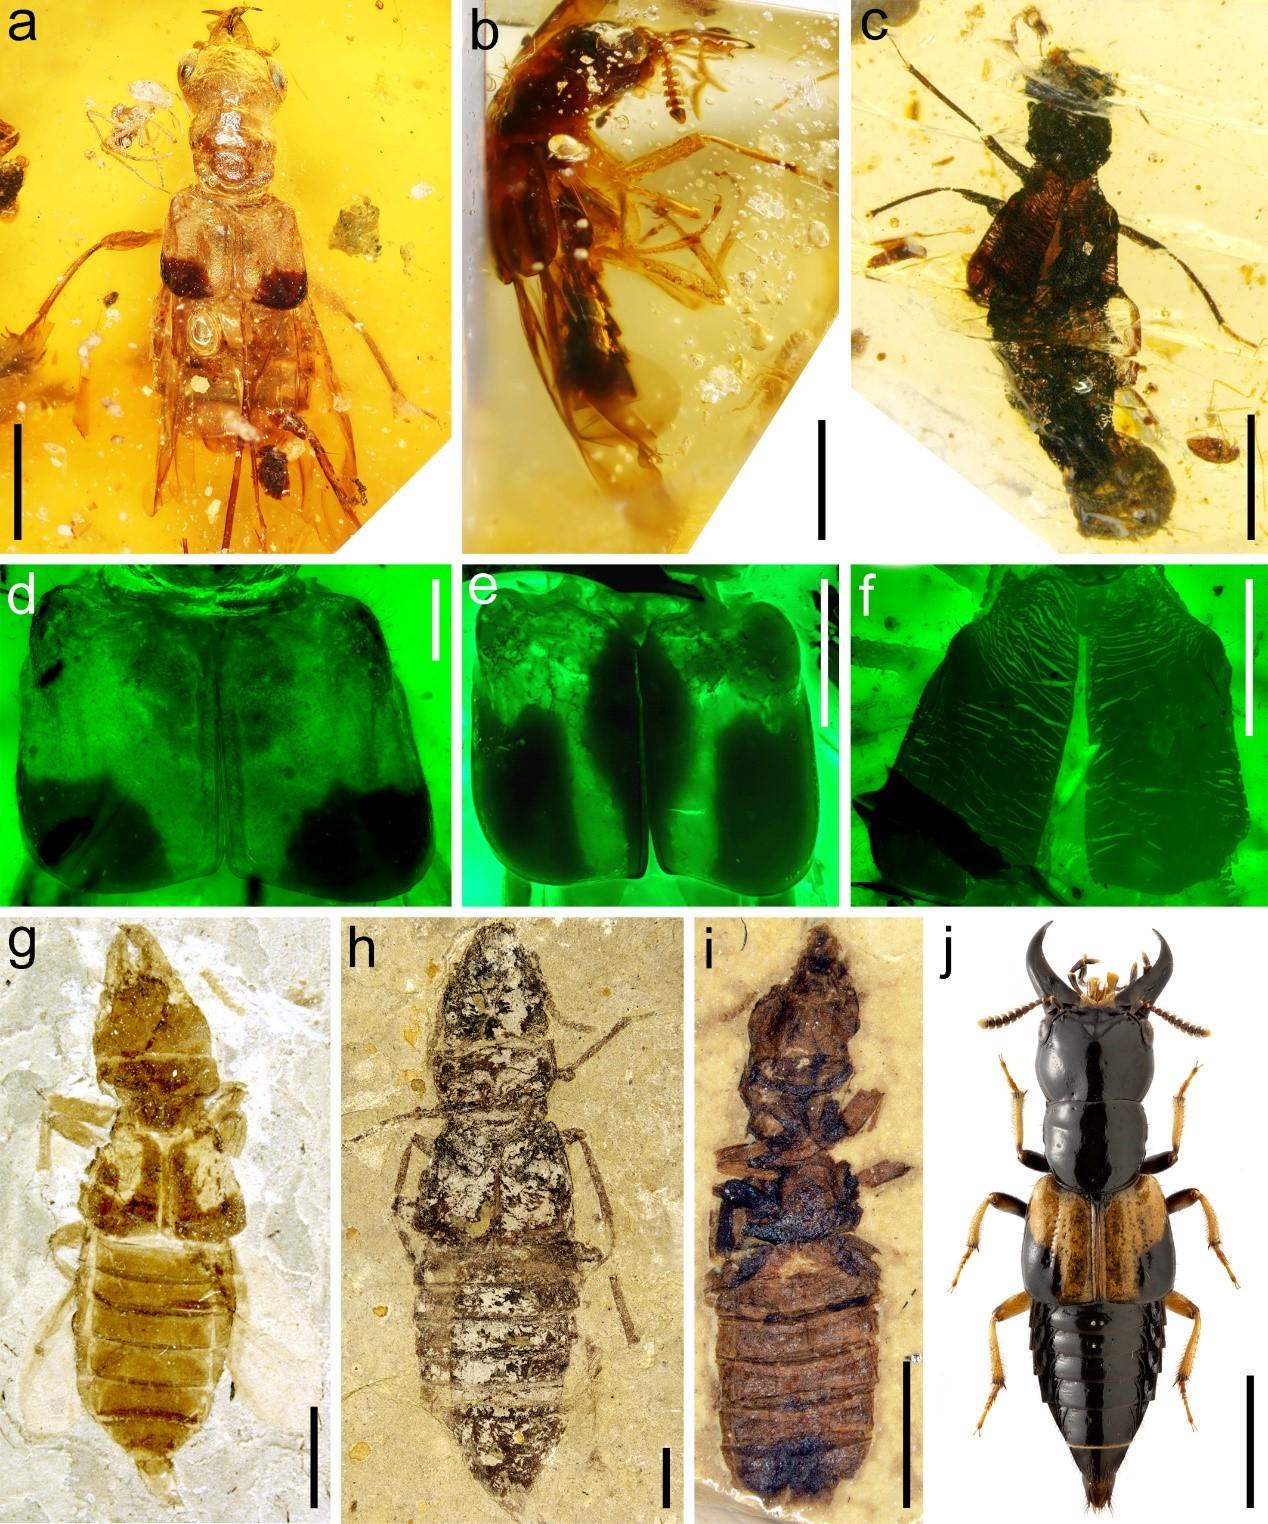 Rove beetles, dating as far back as 125 million years, were found preserved in amber